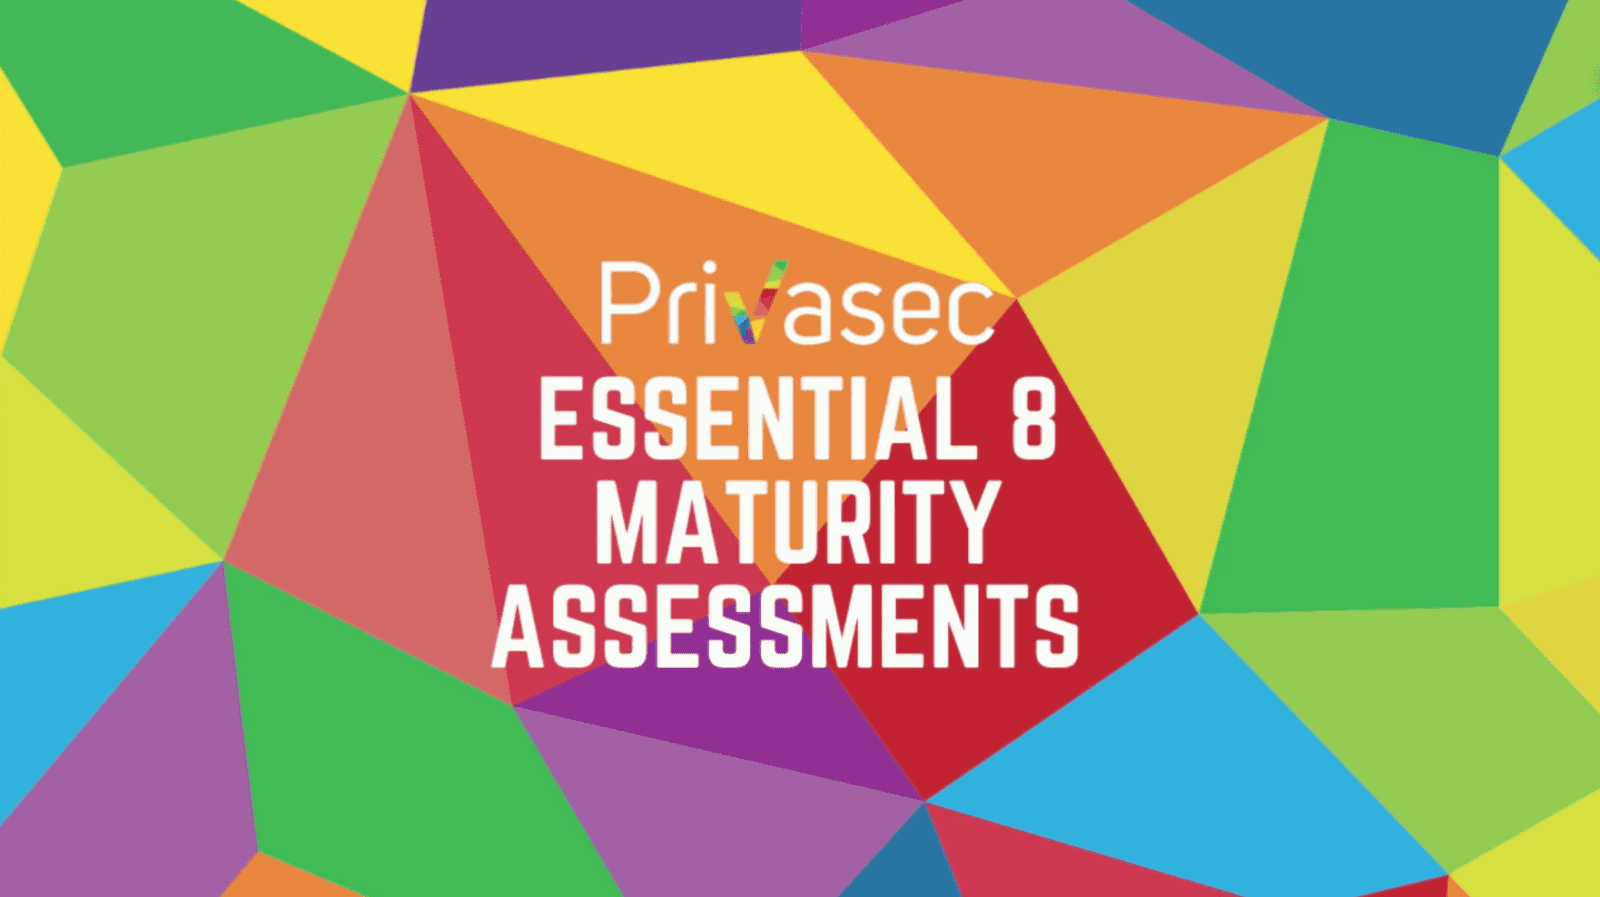 Essential Eight Maturity Assessments | Cyber Security | Privasec